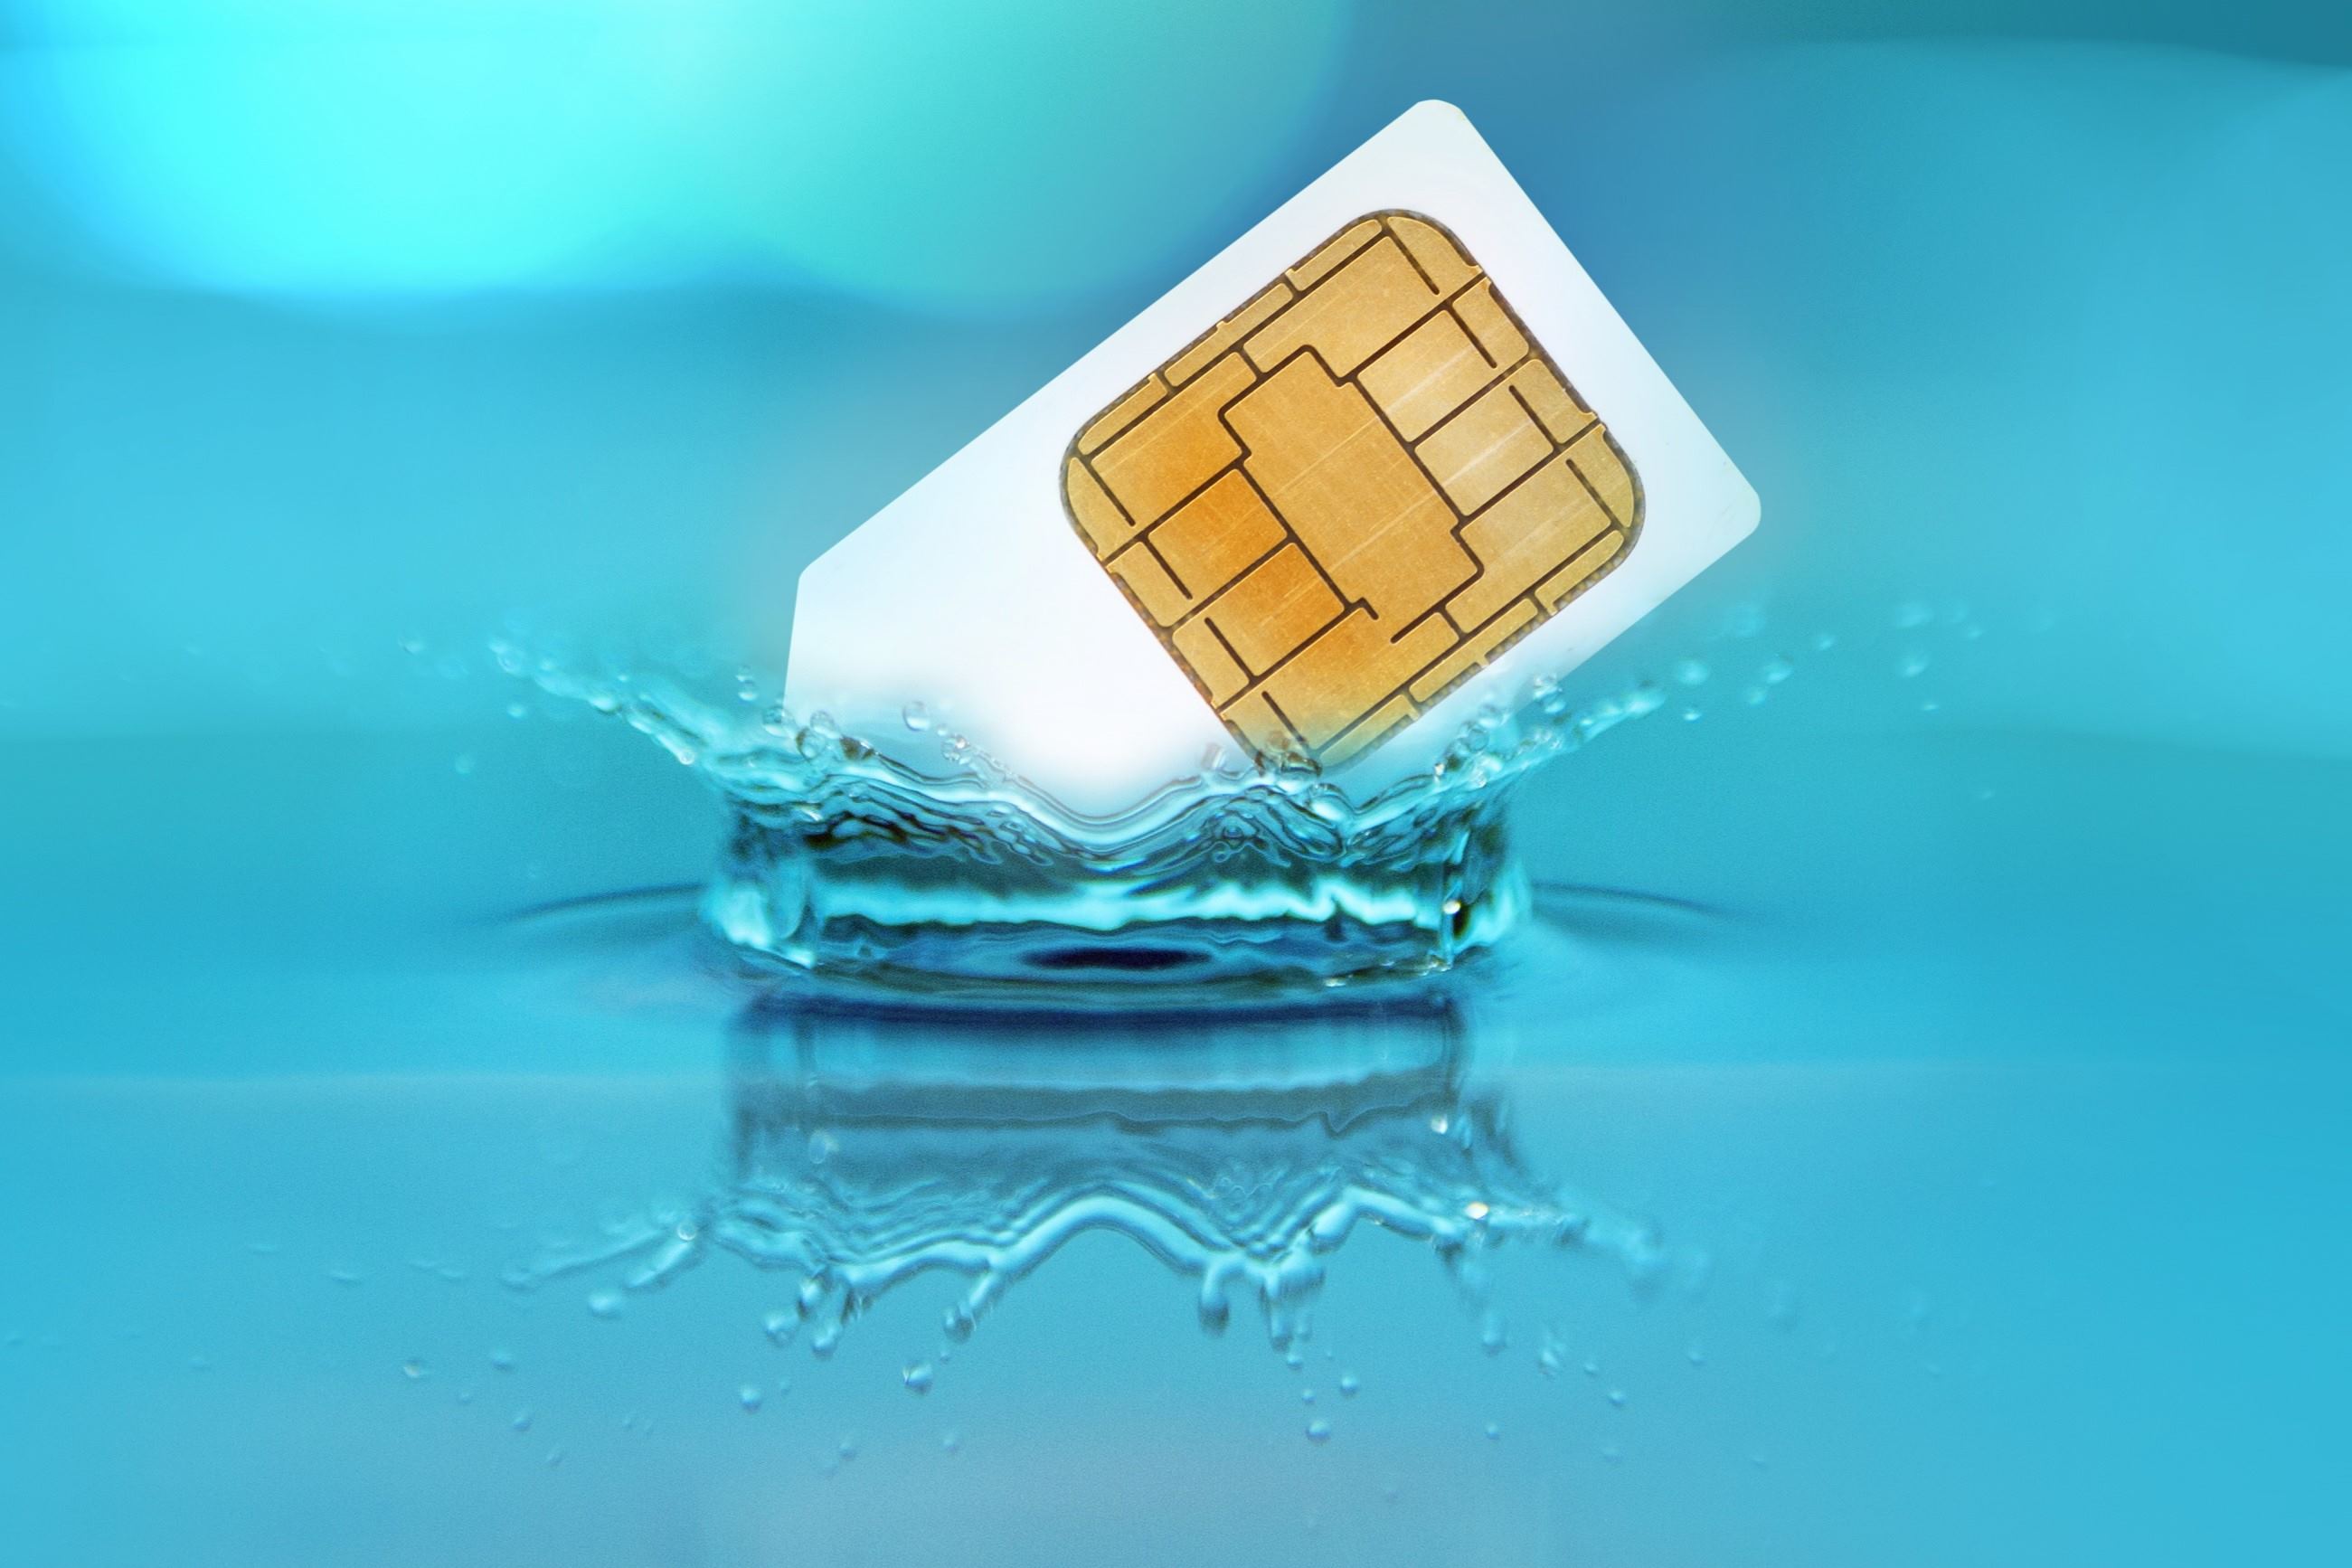 What’s Stored On The SIM Card: Important Data